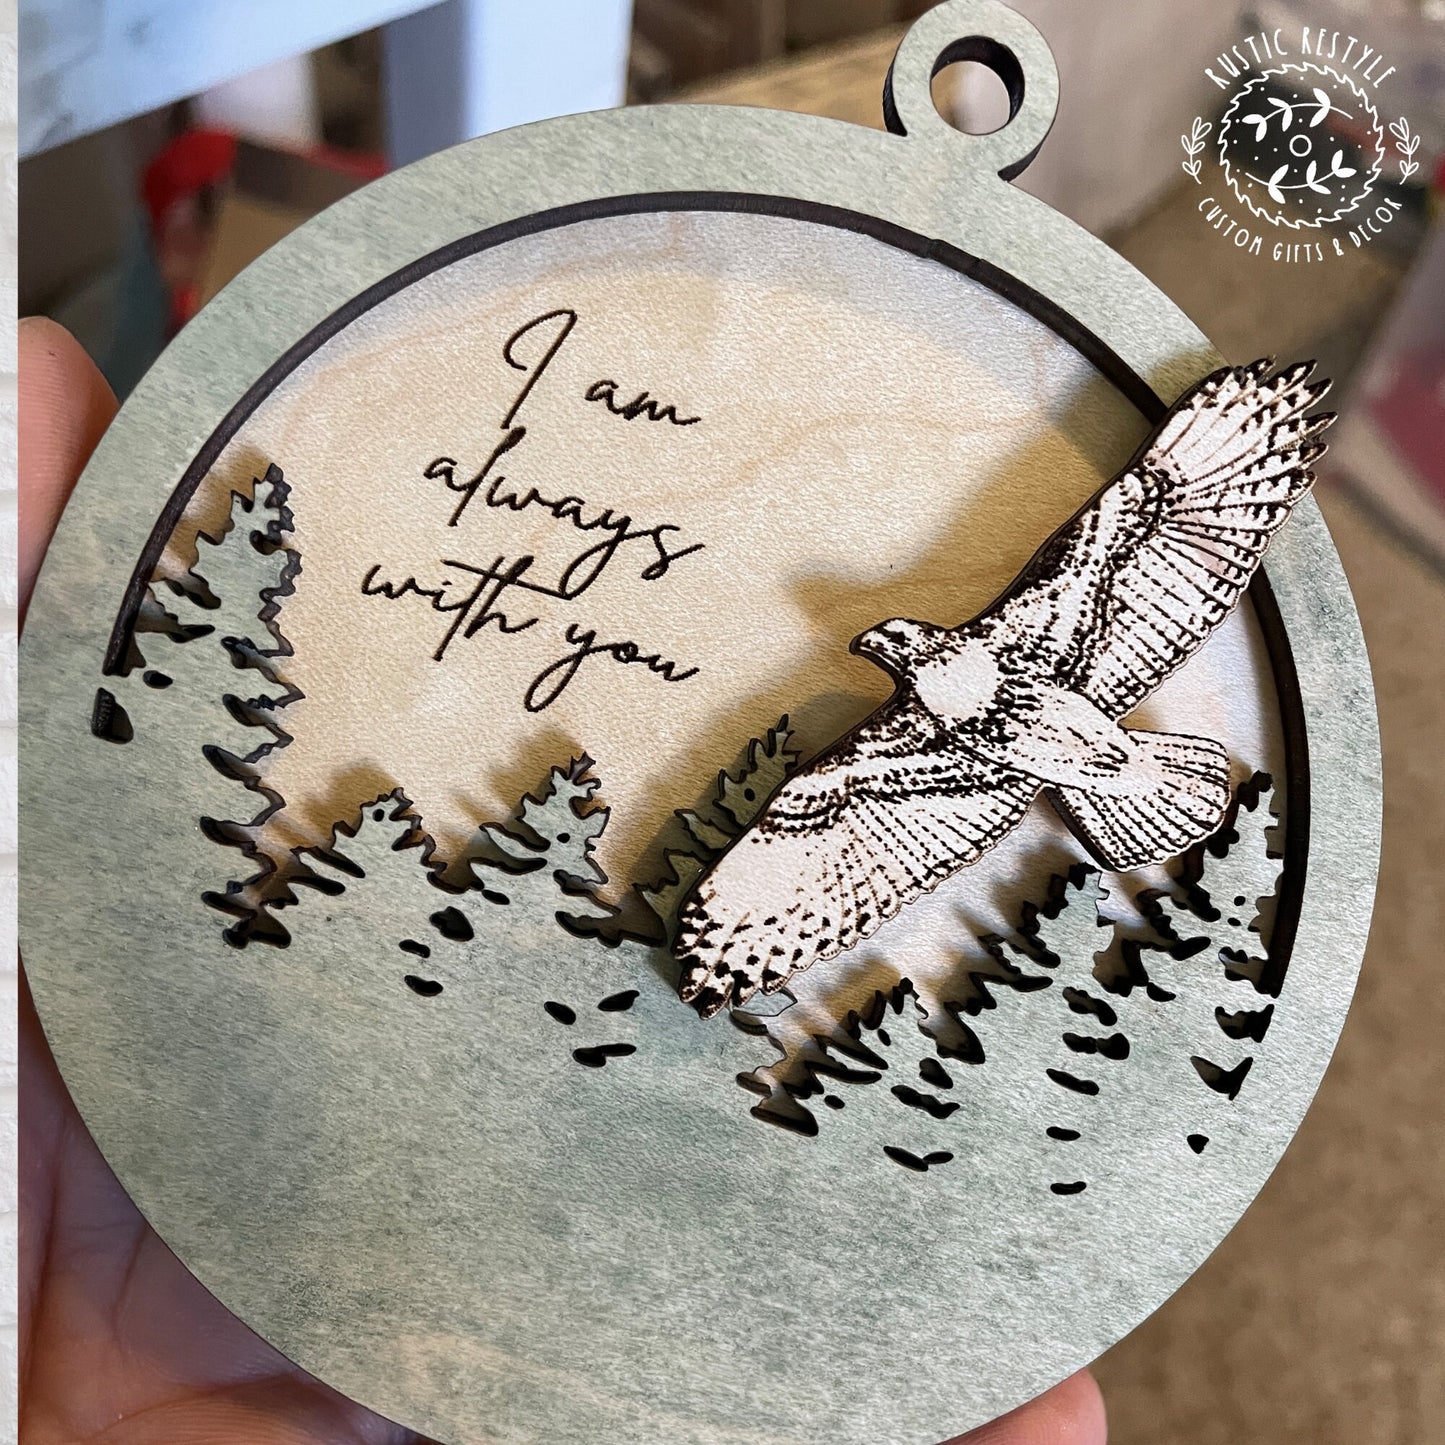 Memorial Hawk Remembrance ornament, 4inch hawk remeberance hanger can be personalized with engraved names